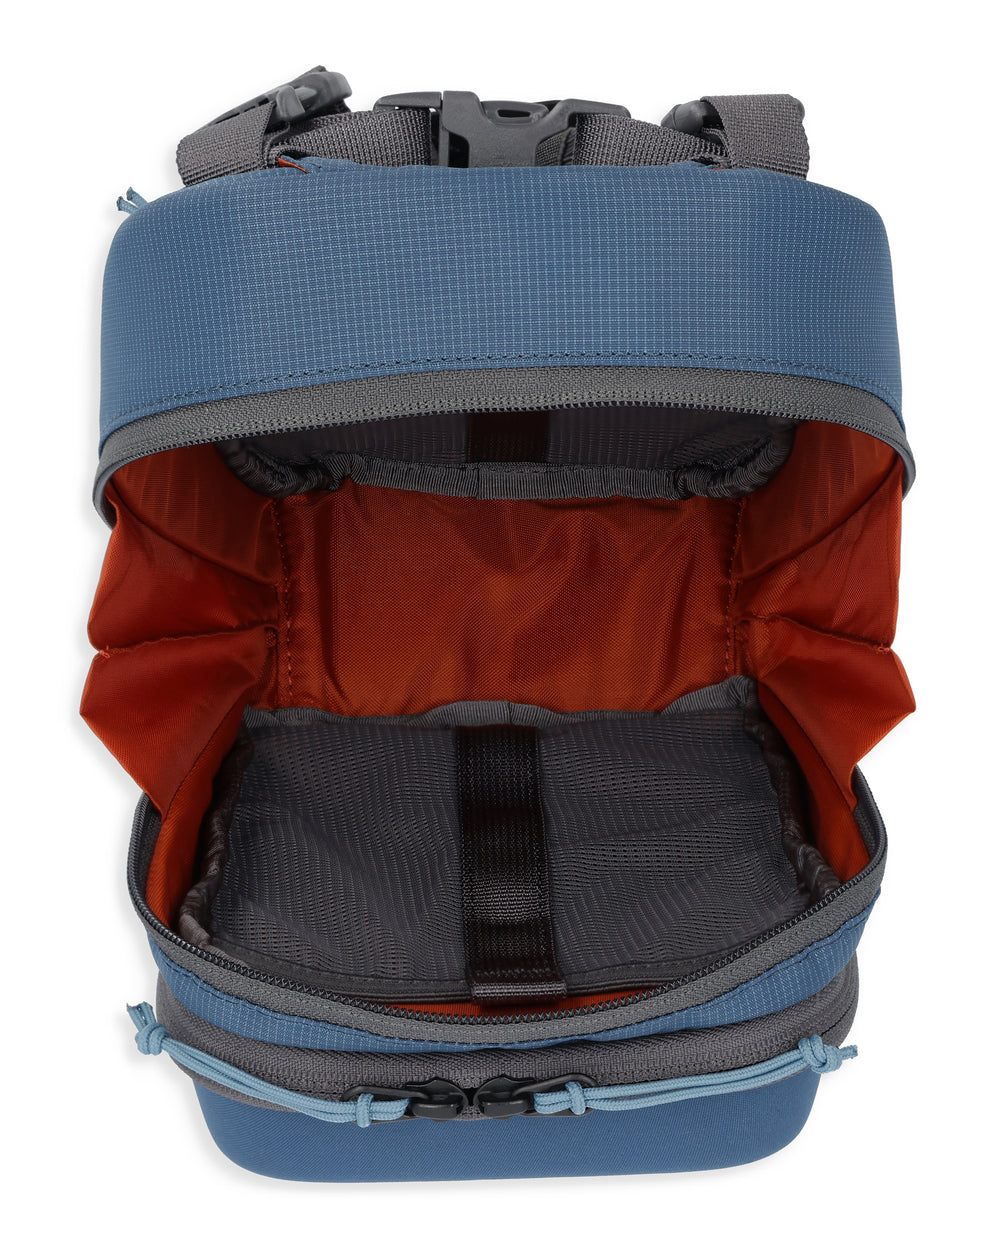 13371-403-freestone-chest-pack-tabletop-s23